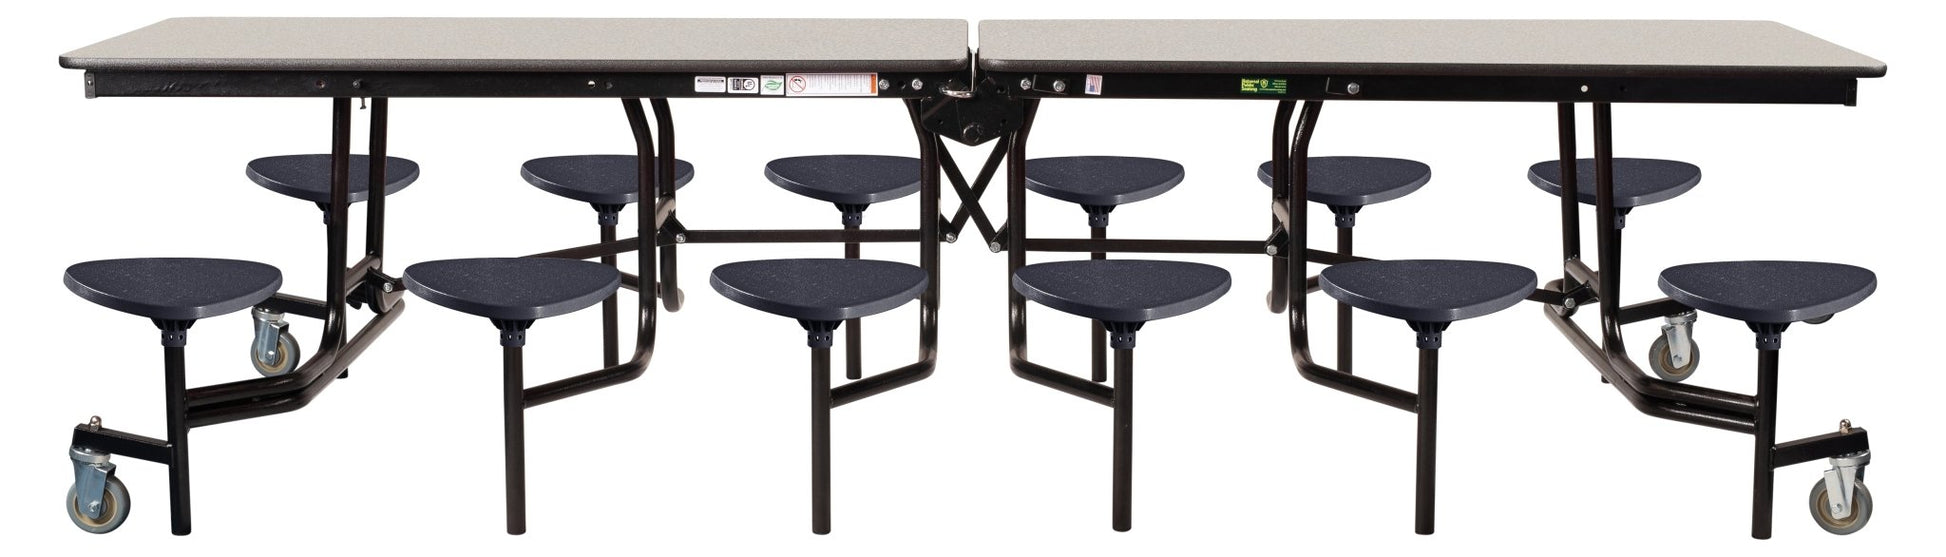 Mobile Cafeteria Lunchroom Stool Table - 30" W x 12' L - 12 Stools - Particleboard Core - T-Molding Edge - Black Powdercoated Frame - SchoolOutlet